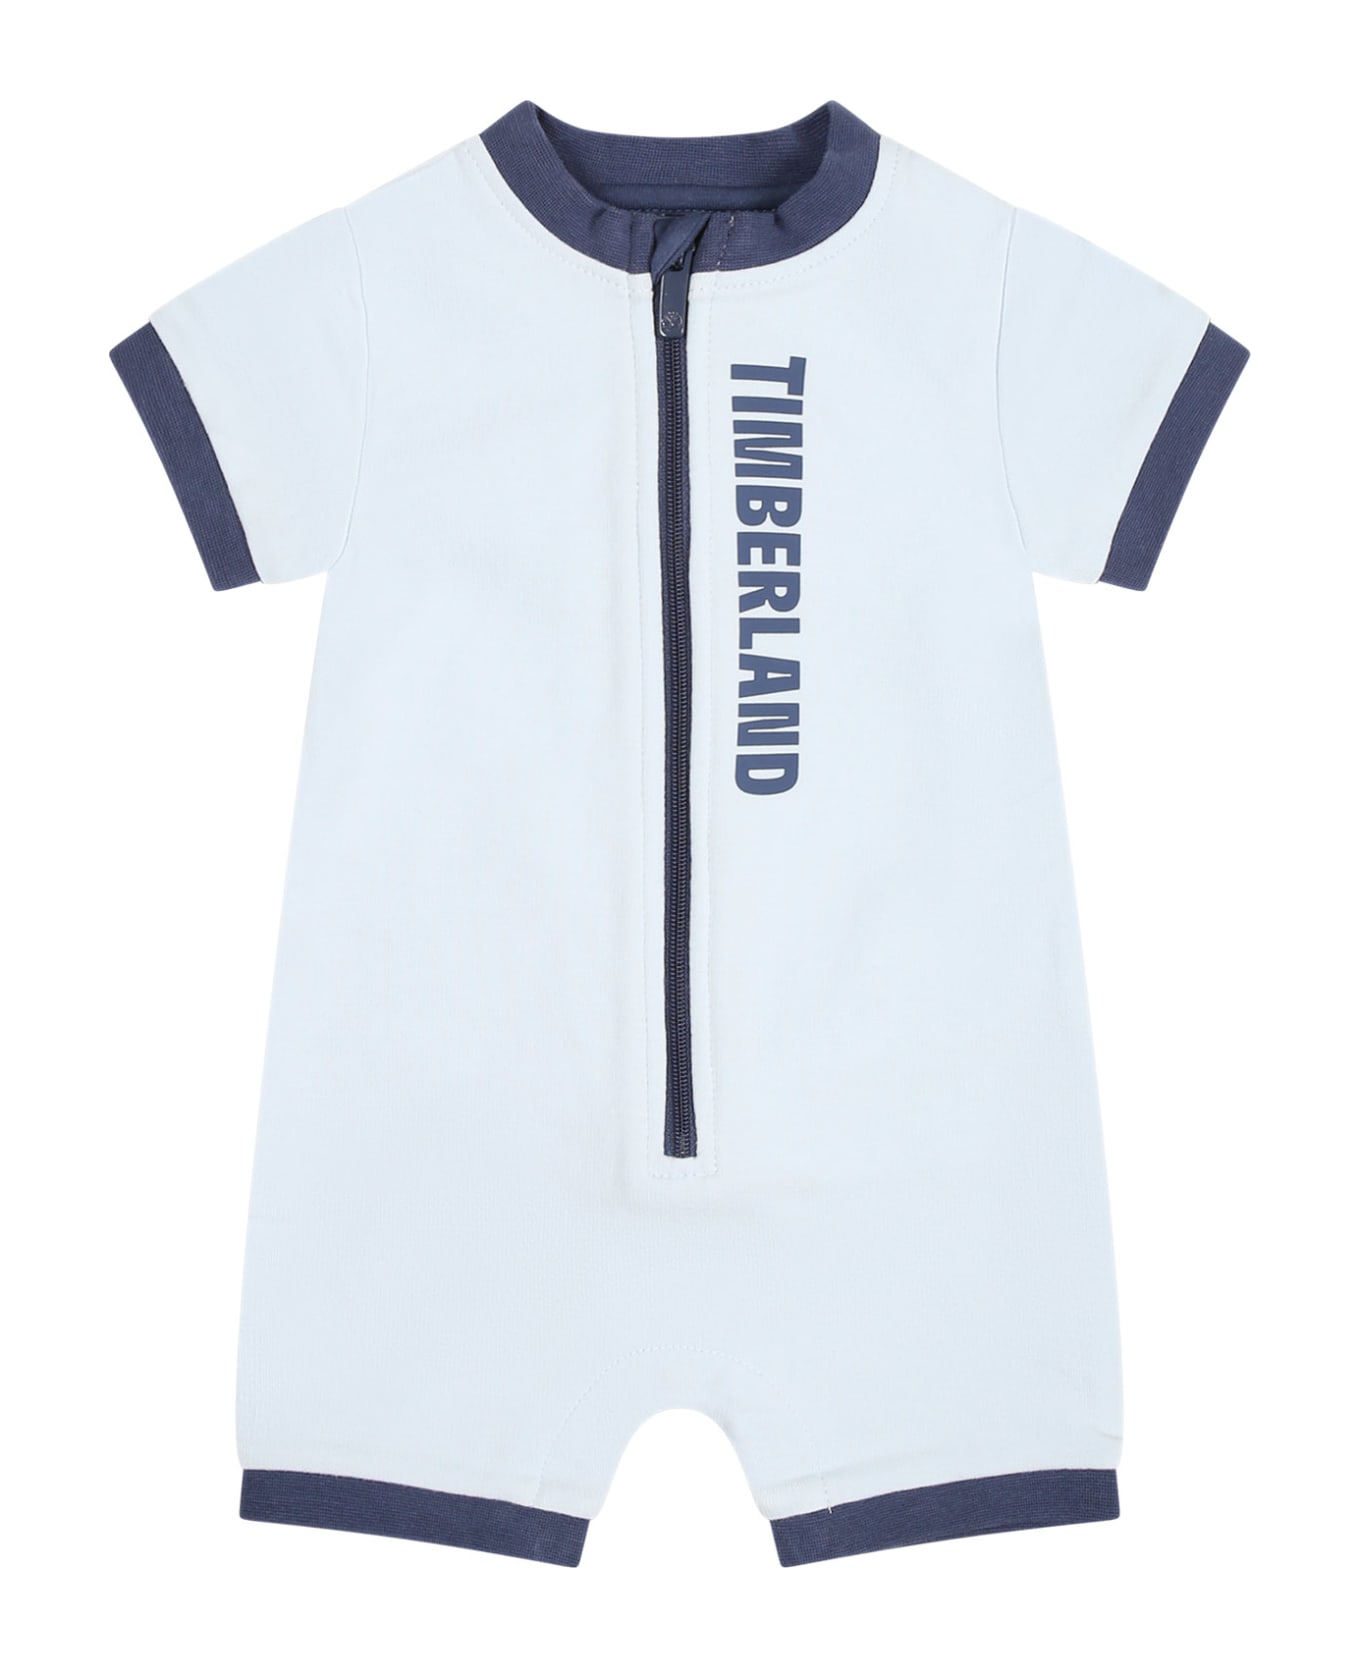 Timberland Light Blue Romper For Baby Boy With Logo - Light Blue